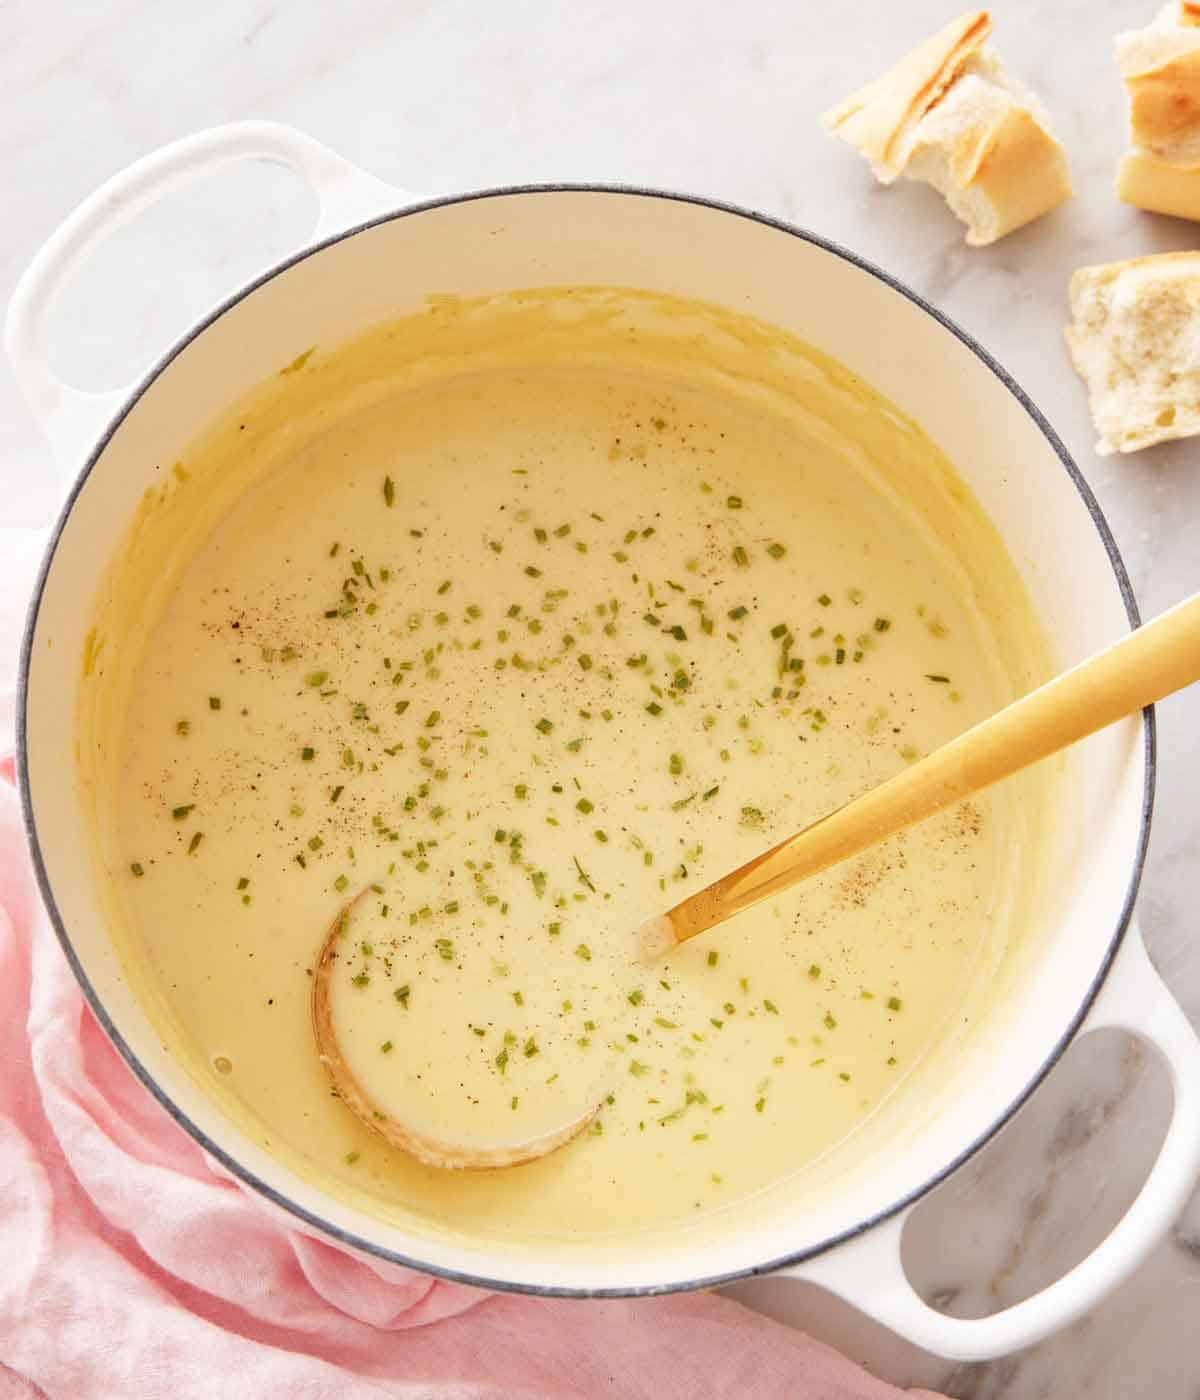 Overhead view of a white pot of potato leek soup with a ladle inside and some torn bread off to the side.